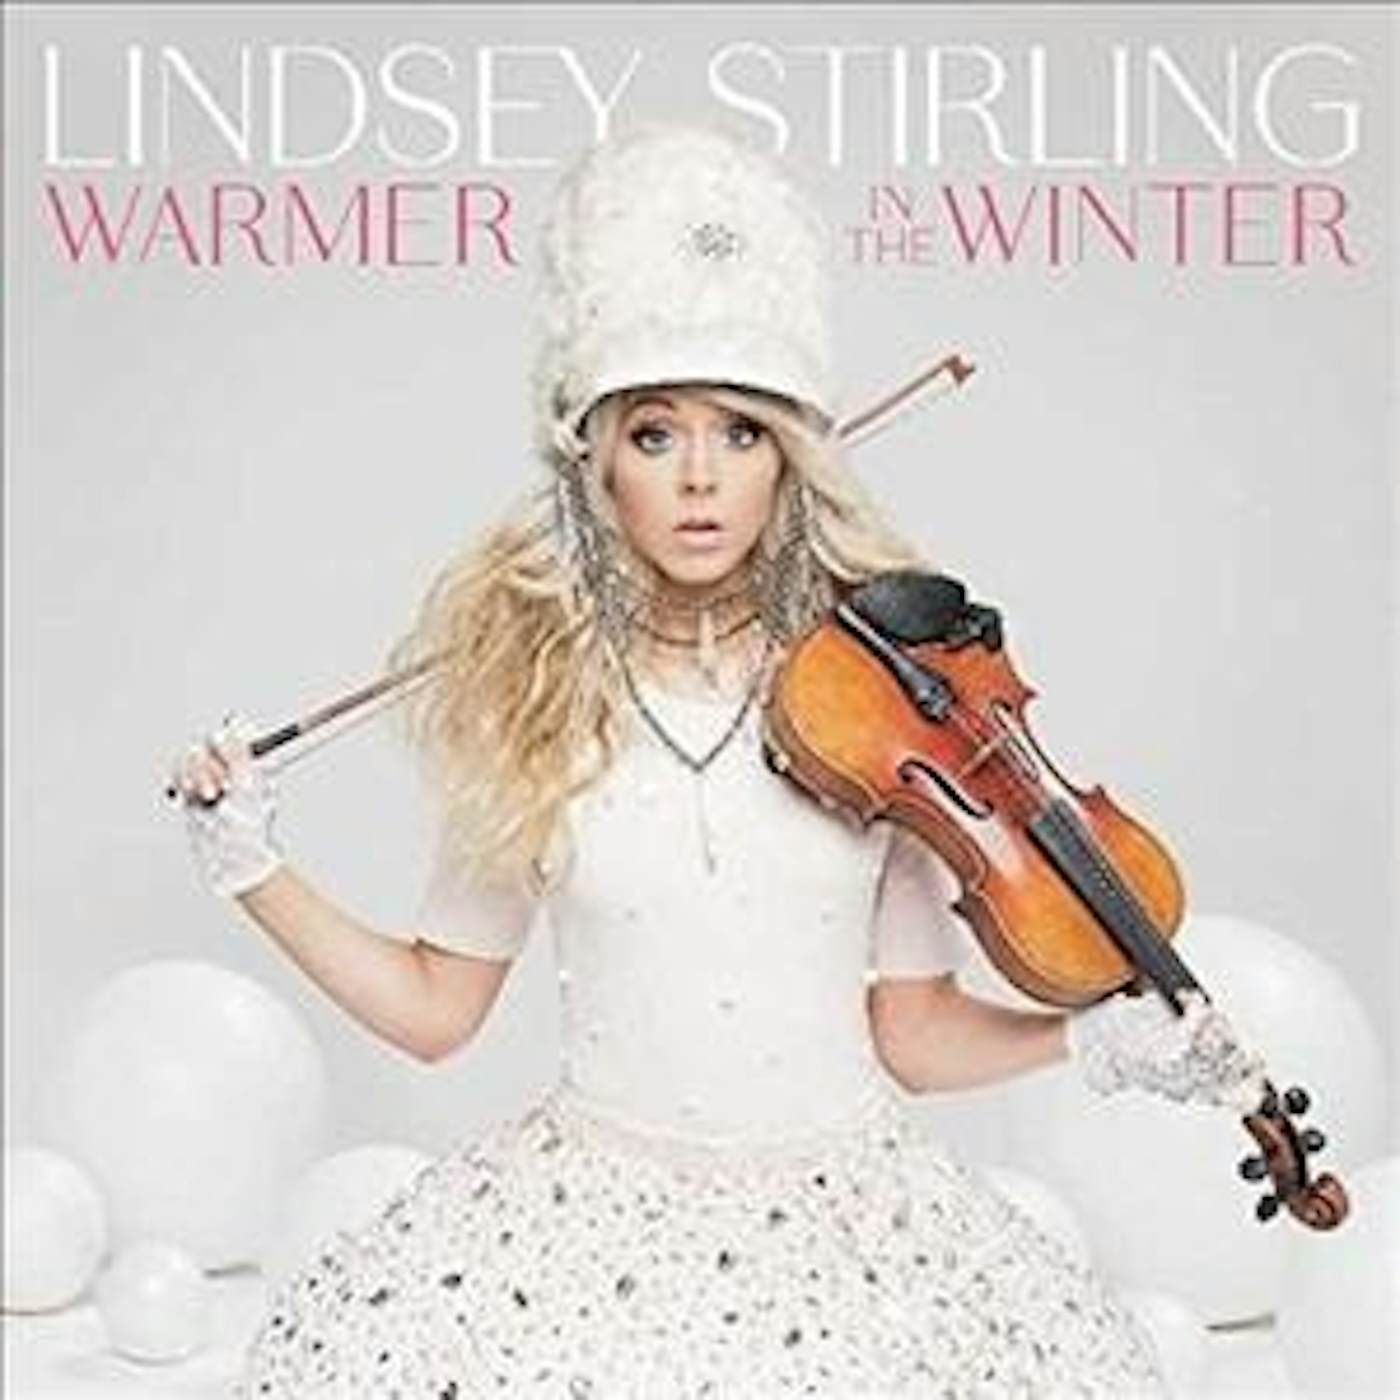 Lindsey Stirling Warmer In The Winter (LP) Vinyl Record